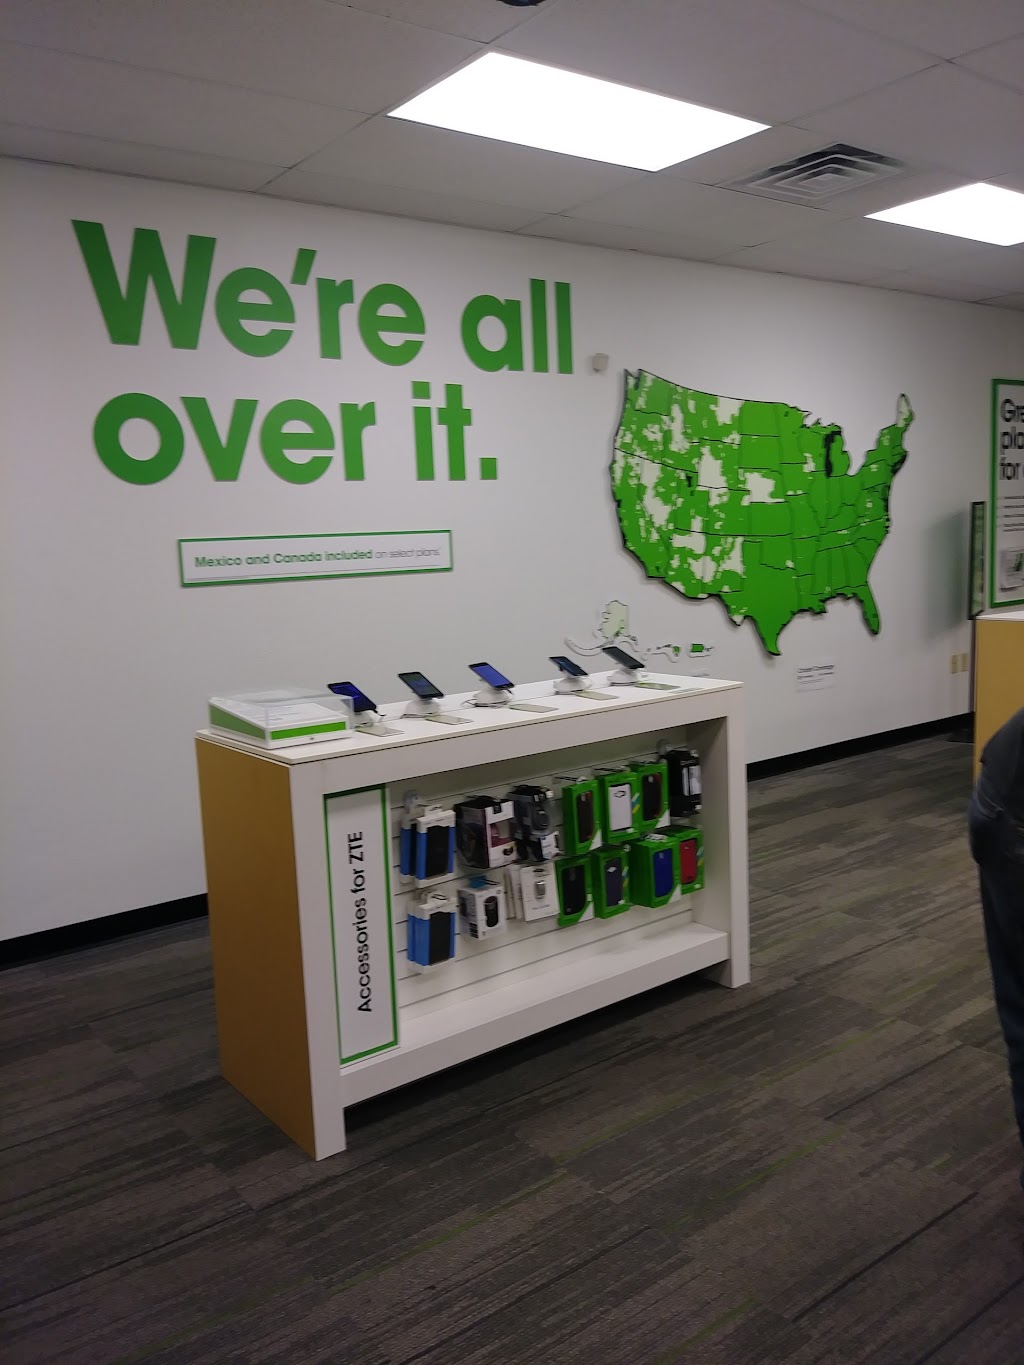 Cricket Wireless Authorized Retailer | 1810 Vaughn Rd, Wood River, IL 62095 | Phone: (618) 717-0047